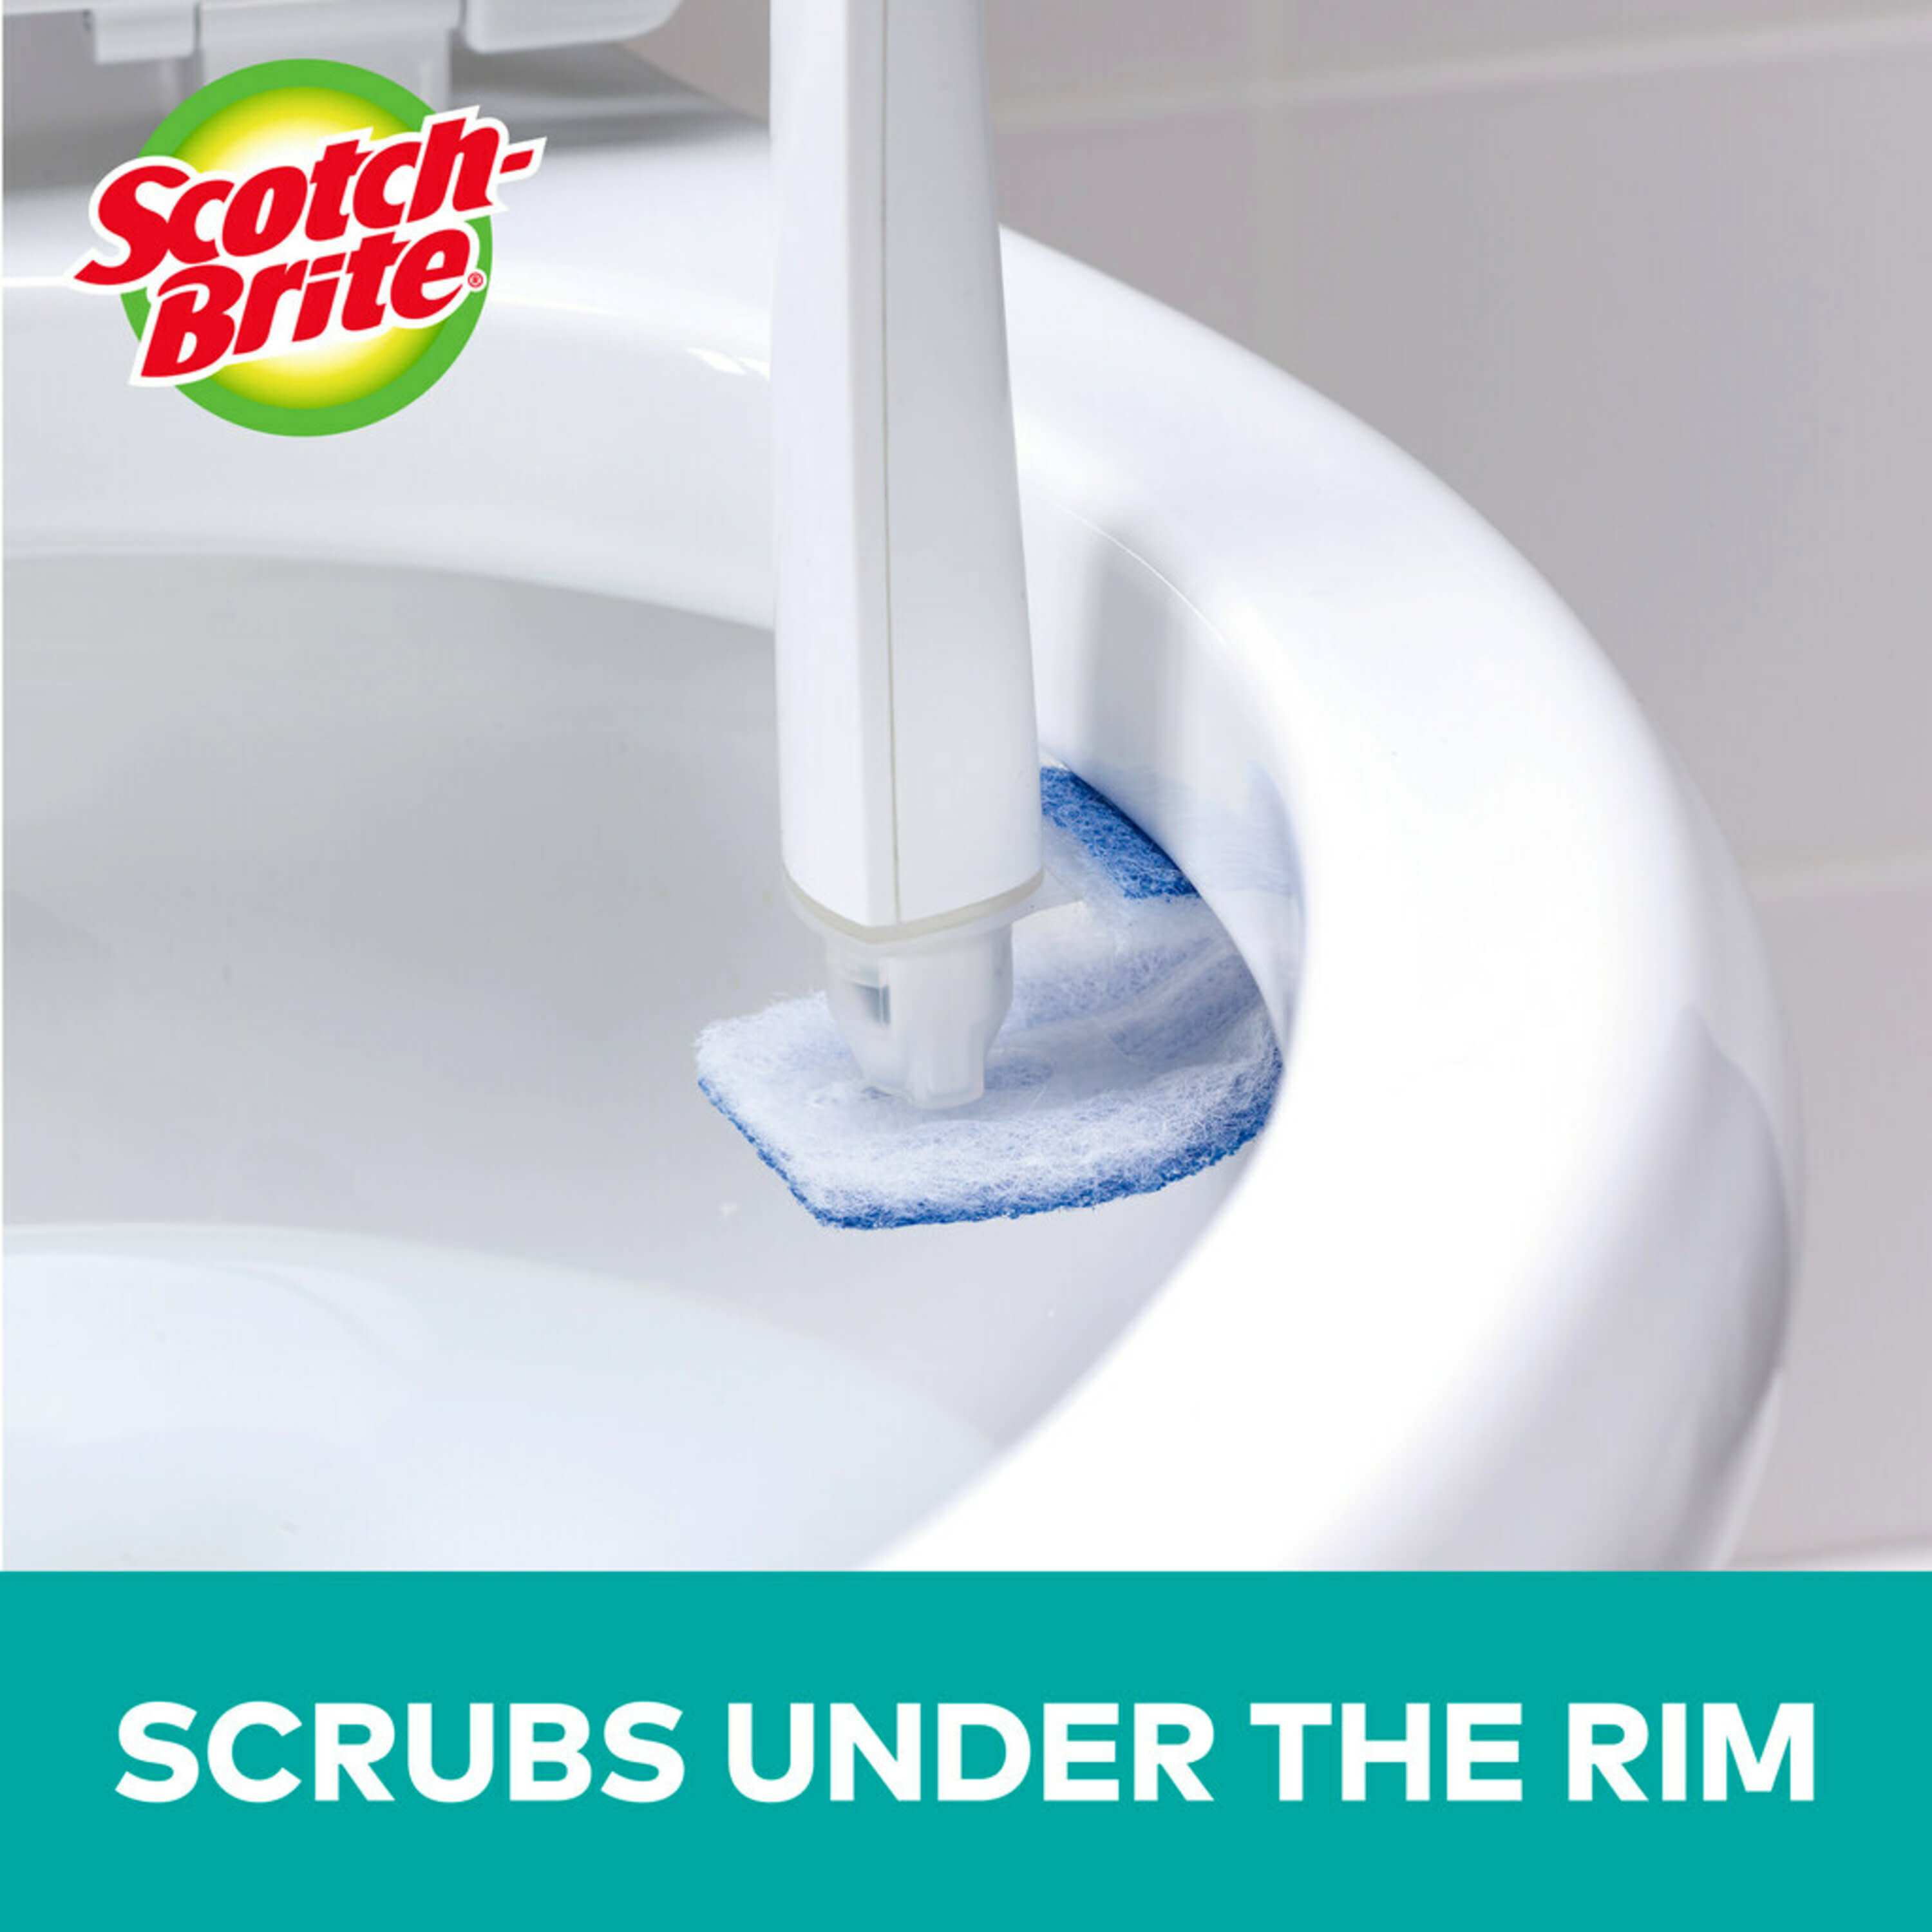 Scotch-Brite Power Scour Toilet Cleaning System, Toilet Bowl Cleaner with Disposable Scrub Pad Tablets, Includes 1 Wand, Stand and 5 Scrubbing Pad